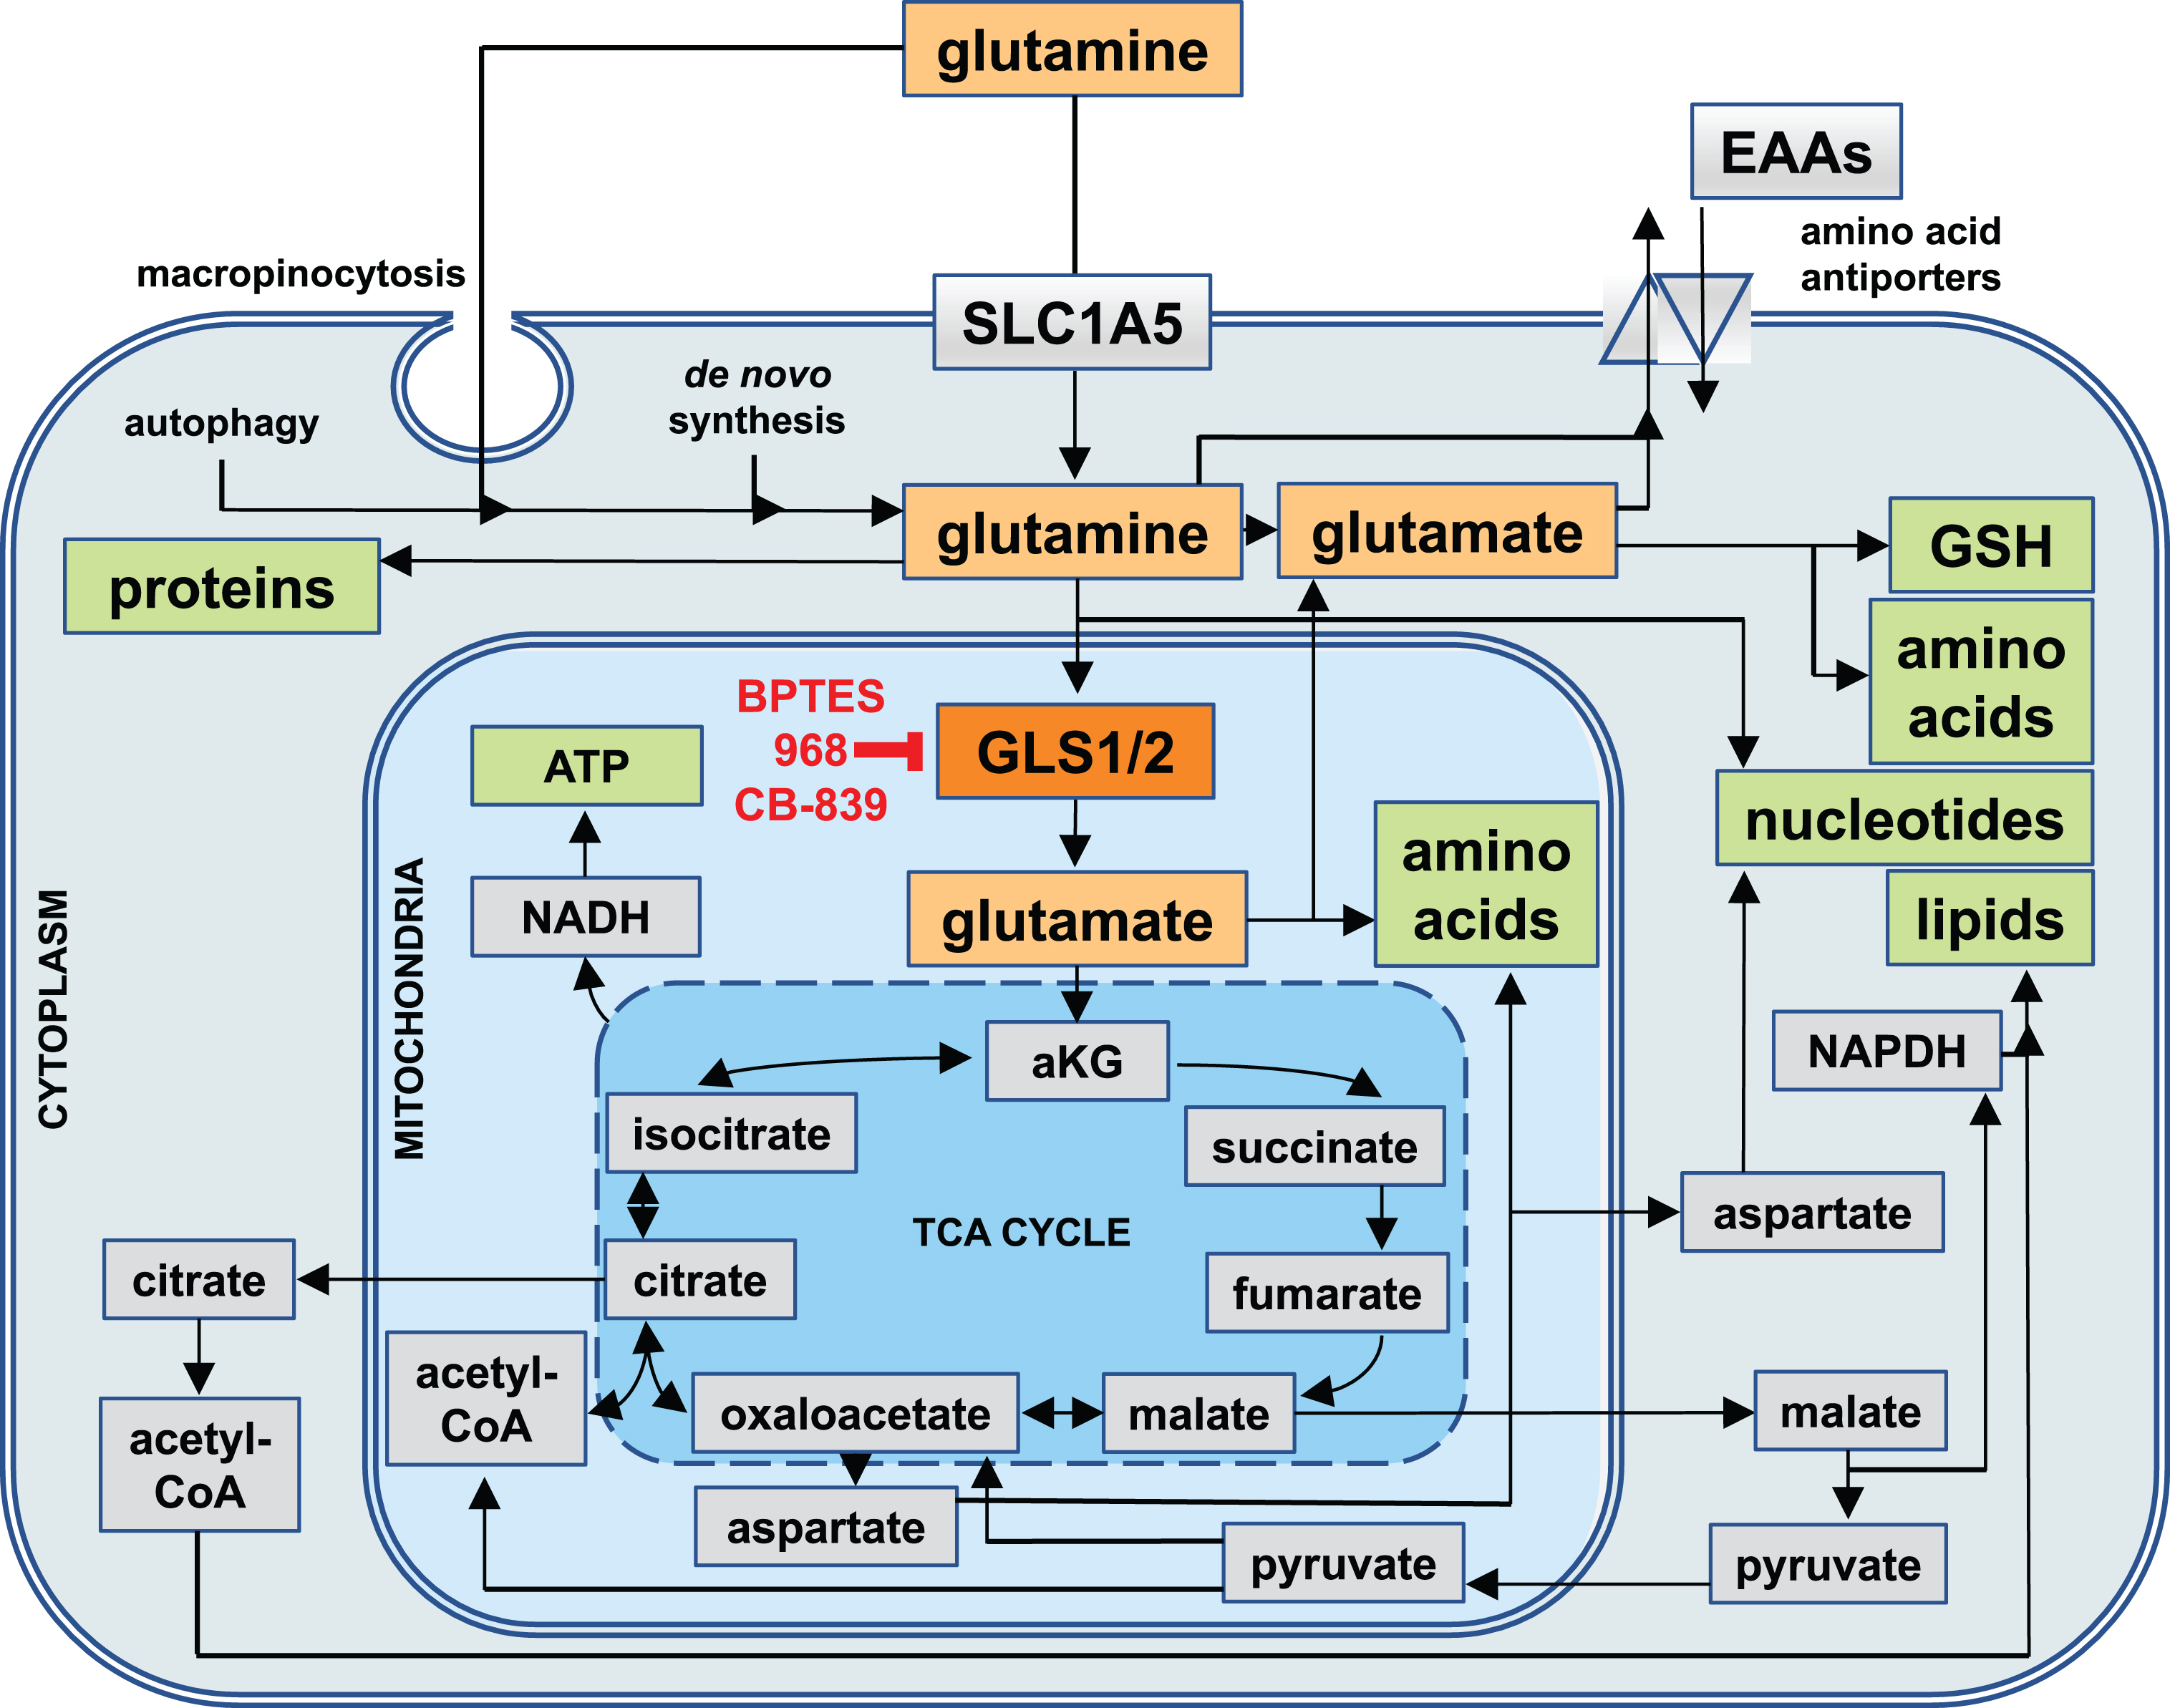 Cellular Uptake Routes and Intracellular Utilization of Glutamine. Glutamine (yellow) is either synthesized by cells de novo, taken up through the solute carrier 1A5 (SLC1A5), or derived from the intracellular breakdown of macromolecules (autophagy). Glutamine and its metabolic product, glutamate (orange), can be exported from cells in exchange for other essential amino acids (EAAs). Intracellularly, they are involved in a wide range of metabolic pathways that serve to generate other amino acids and glutathione (GSH) as well as precursors for the biosynthesis of nucleotides and reducing equivalents in the form of nicotinamide adenine dinucleotide (NADH) and NADH phosphate (NADPH) for generating energy and lipids. Most of glutamine is utilized by mitochondria, where the enzyme glutaminase 1 (GLS1, red) or glutaminase 2 (GLS2, not shown) convert glutamine into glutamate, which in the form of alpha-ketoglutarate (aKG) can enter the tricarboxylic acid cycle (TCA cycle). GLS1 is the target of glutaminase inhibitors such as BPTES, 968, and CB-839.